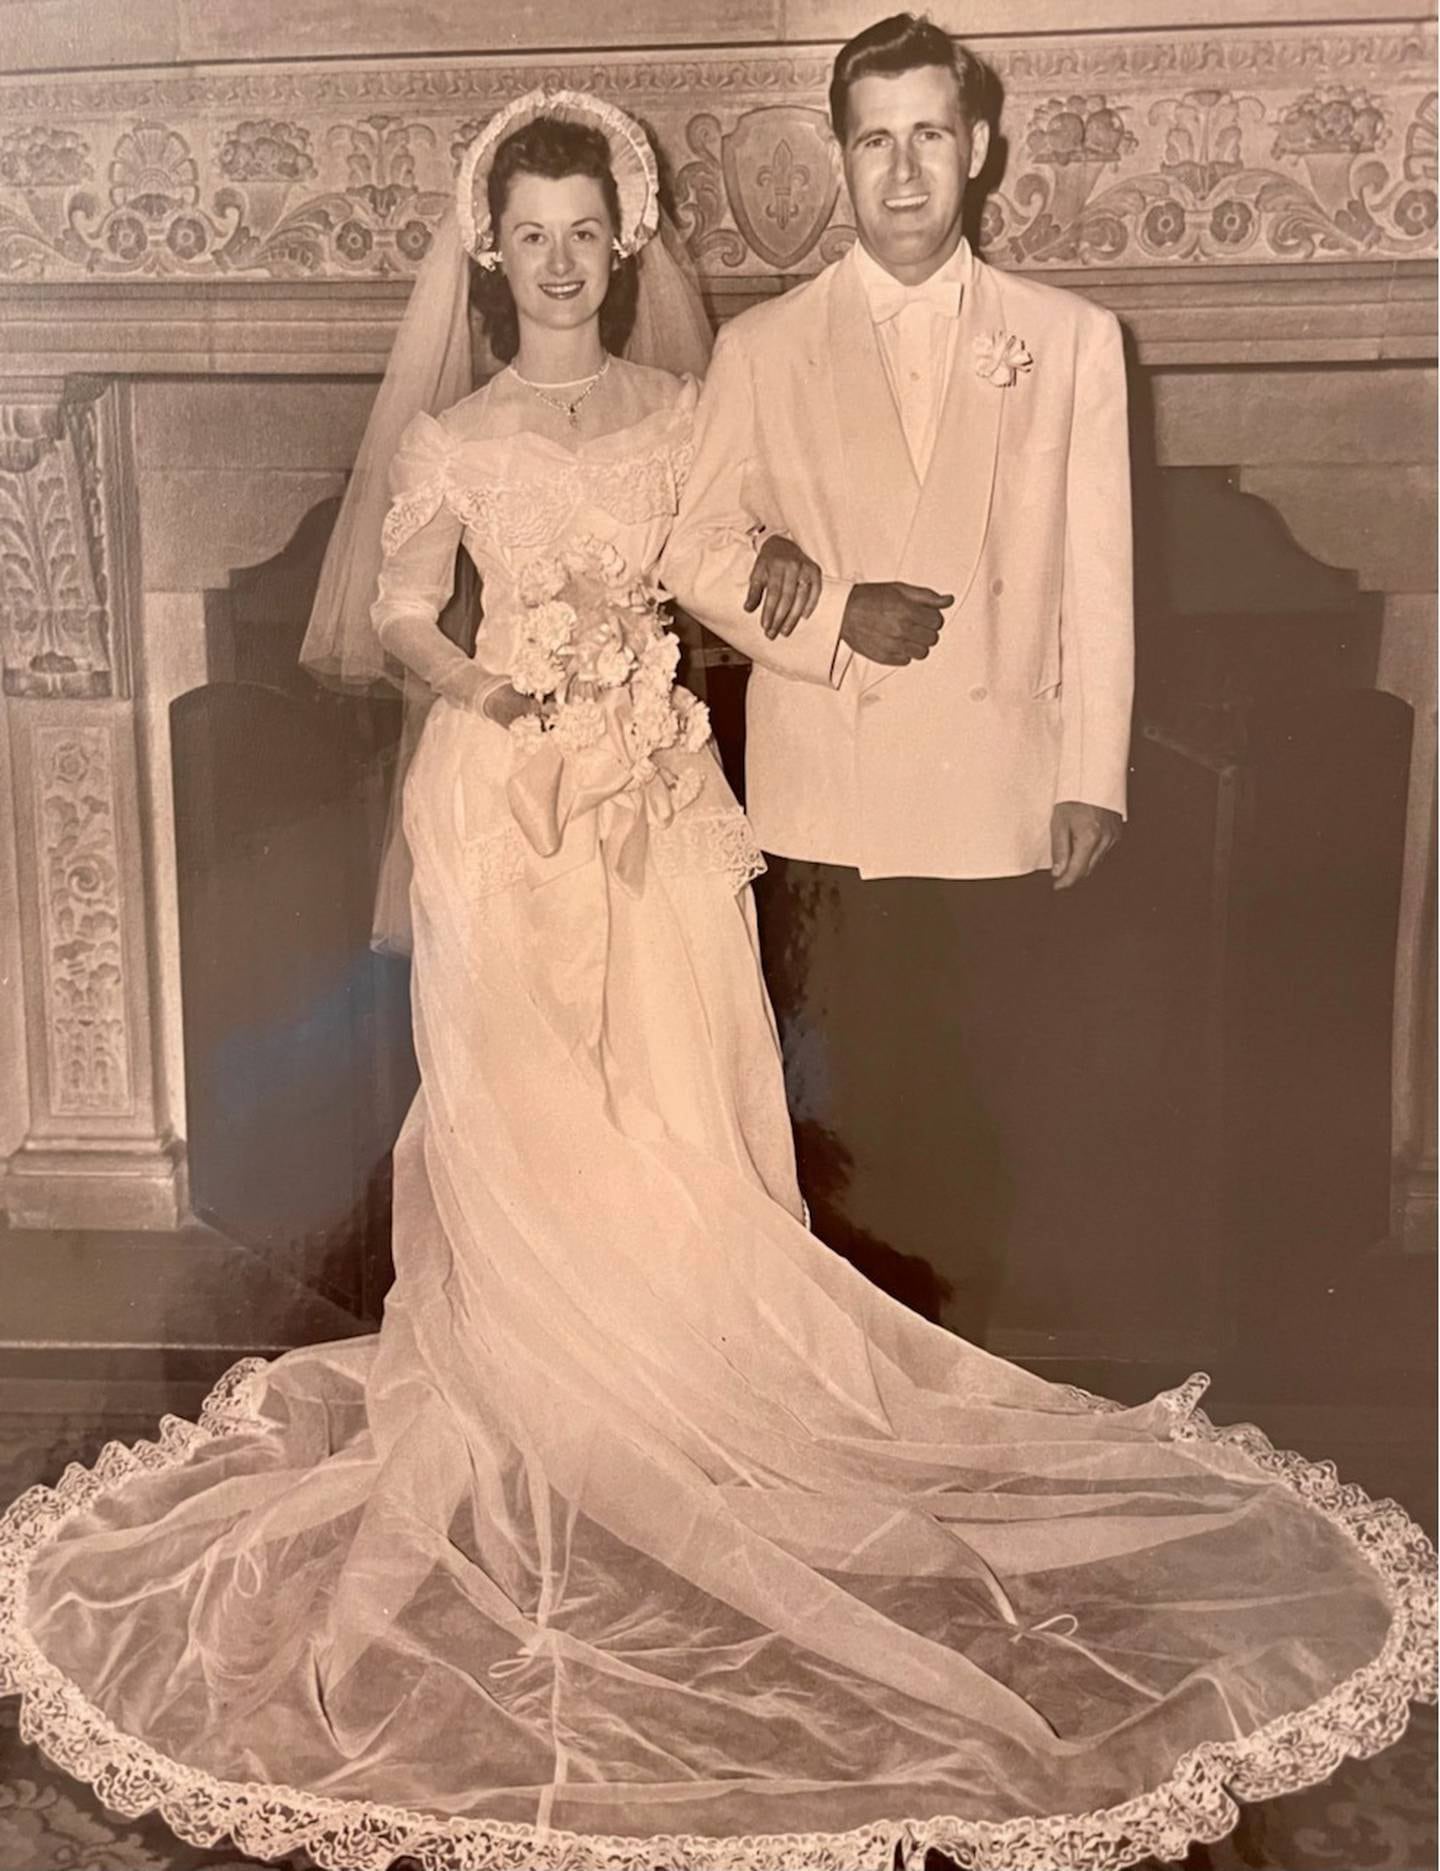 After serving in World War II, Glenn Masek returned to Joliet, and met Helen Gleason on a blind date.  They were married on May 14, 1949, at the Cathedral of Saint Raymond Nonnatus.